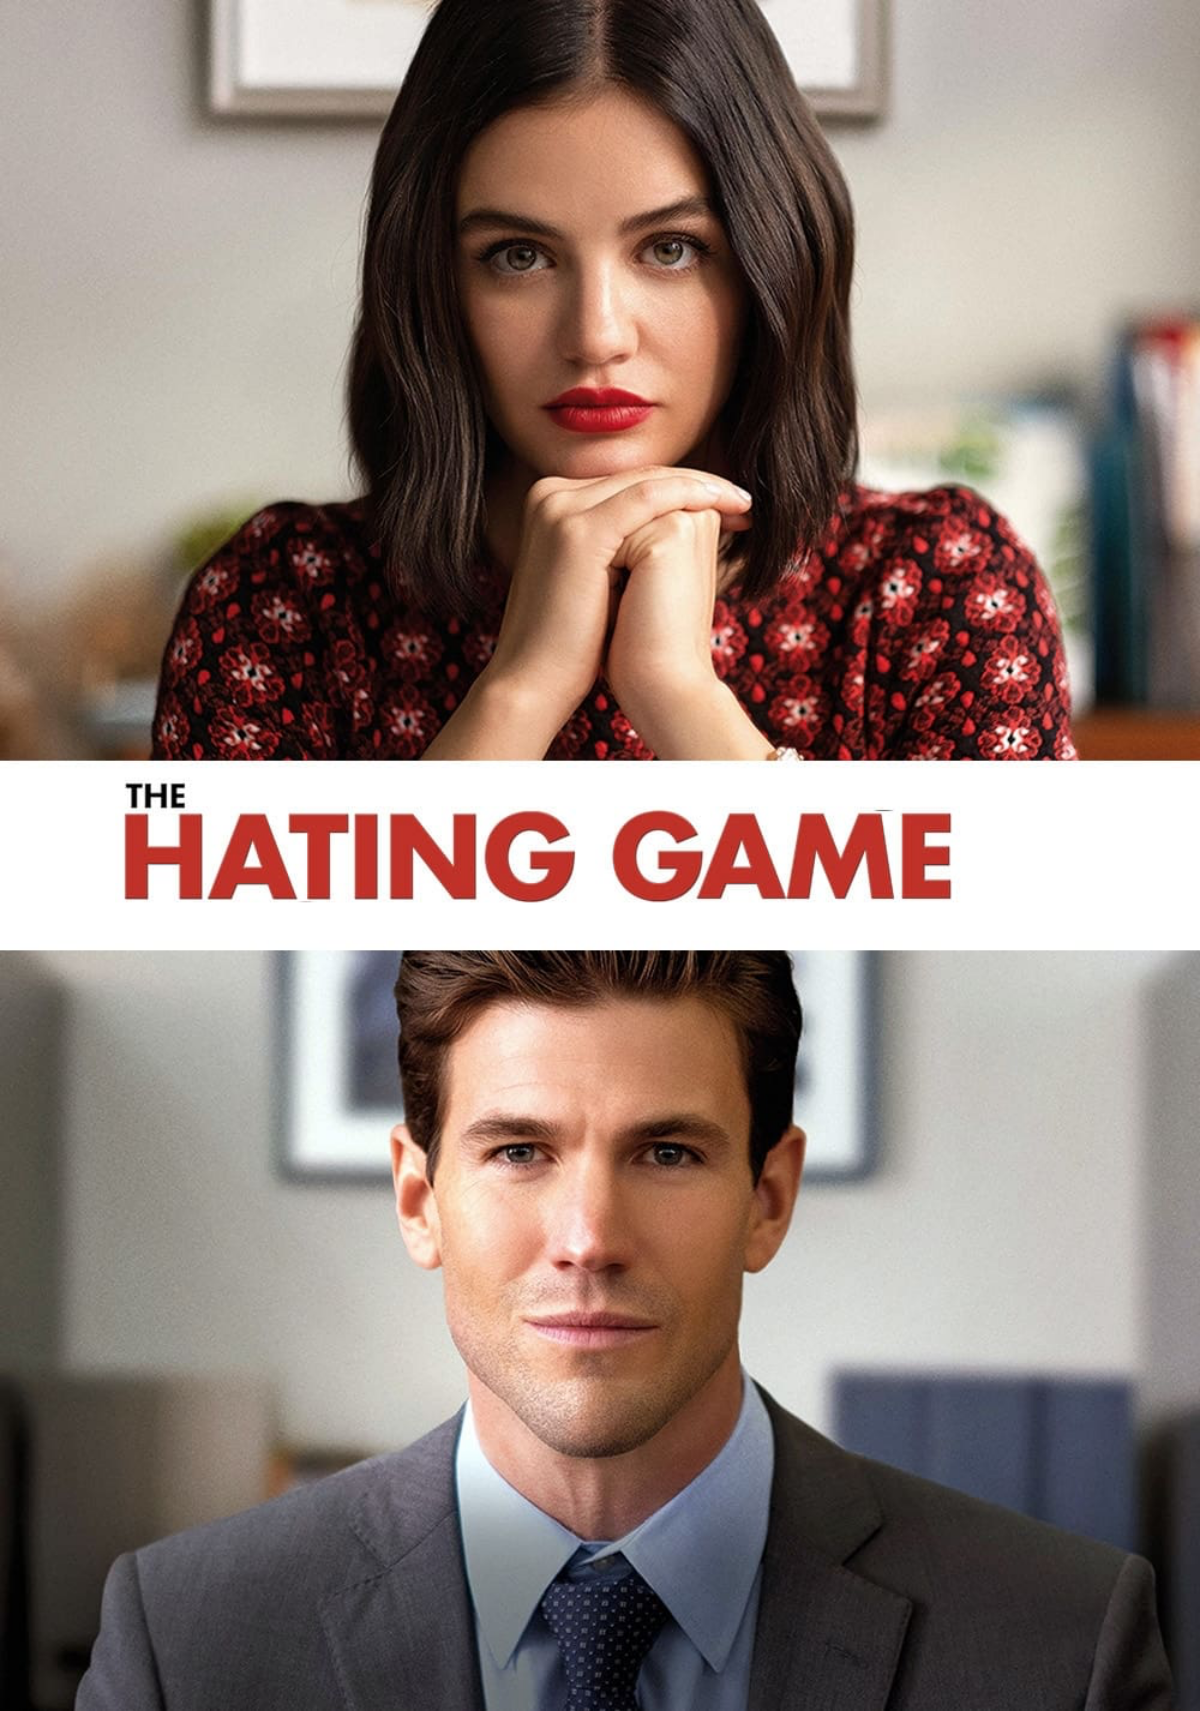 the hating game poster for movie